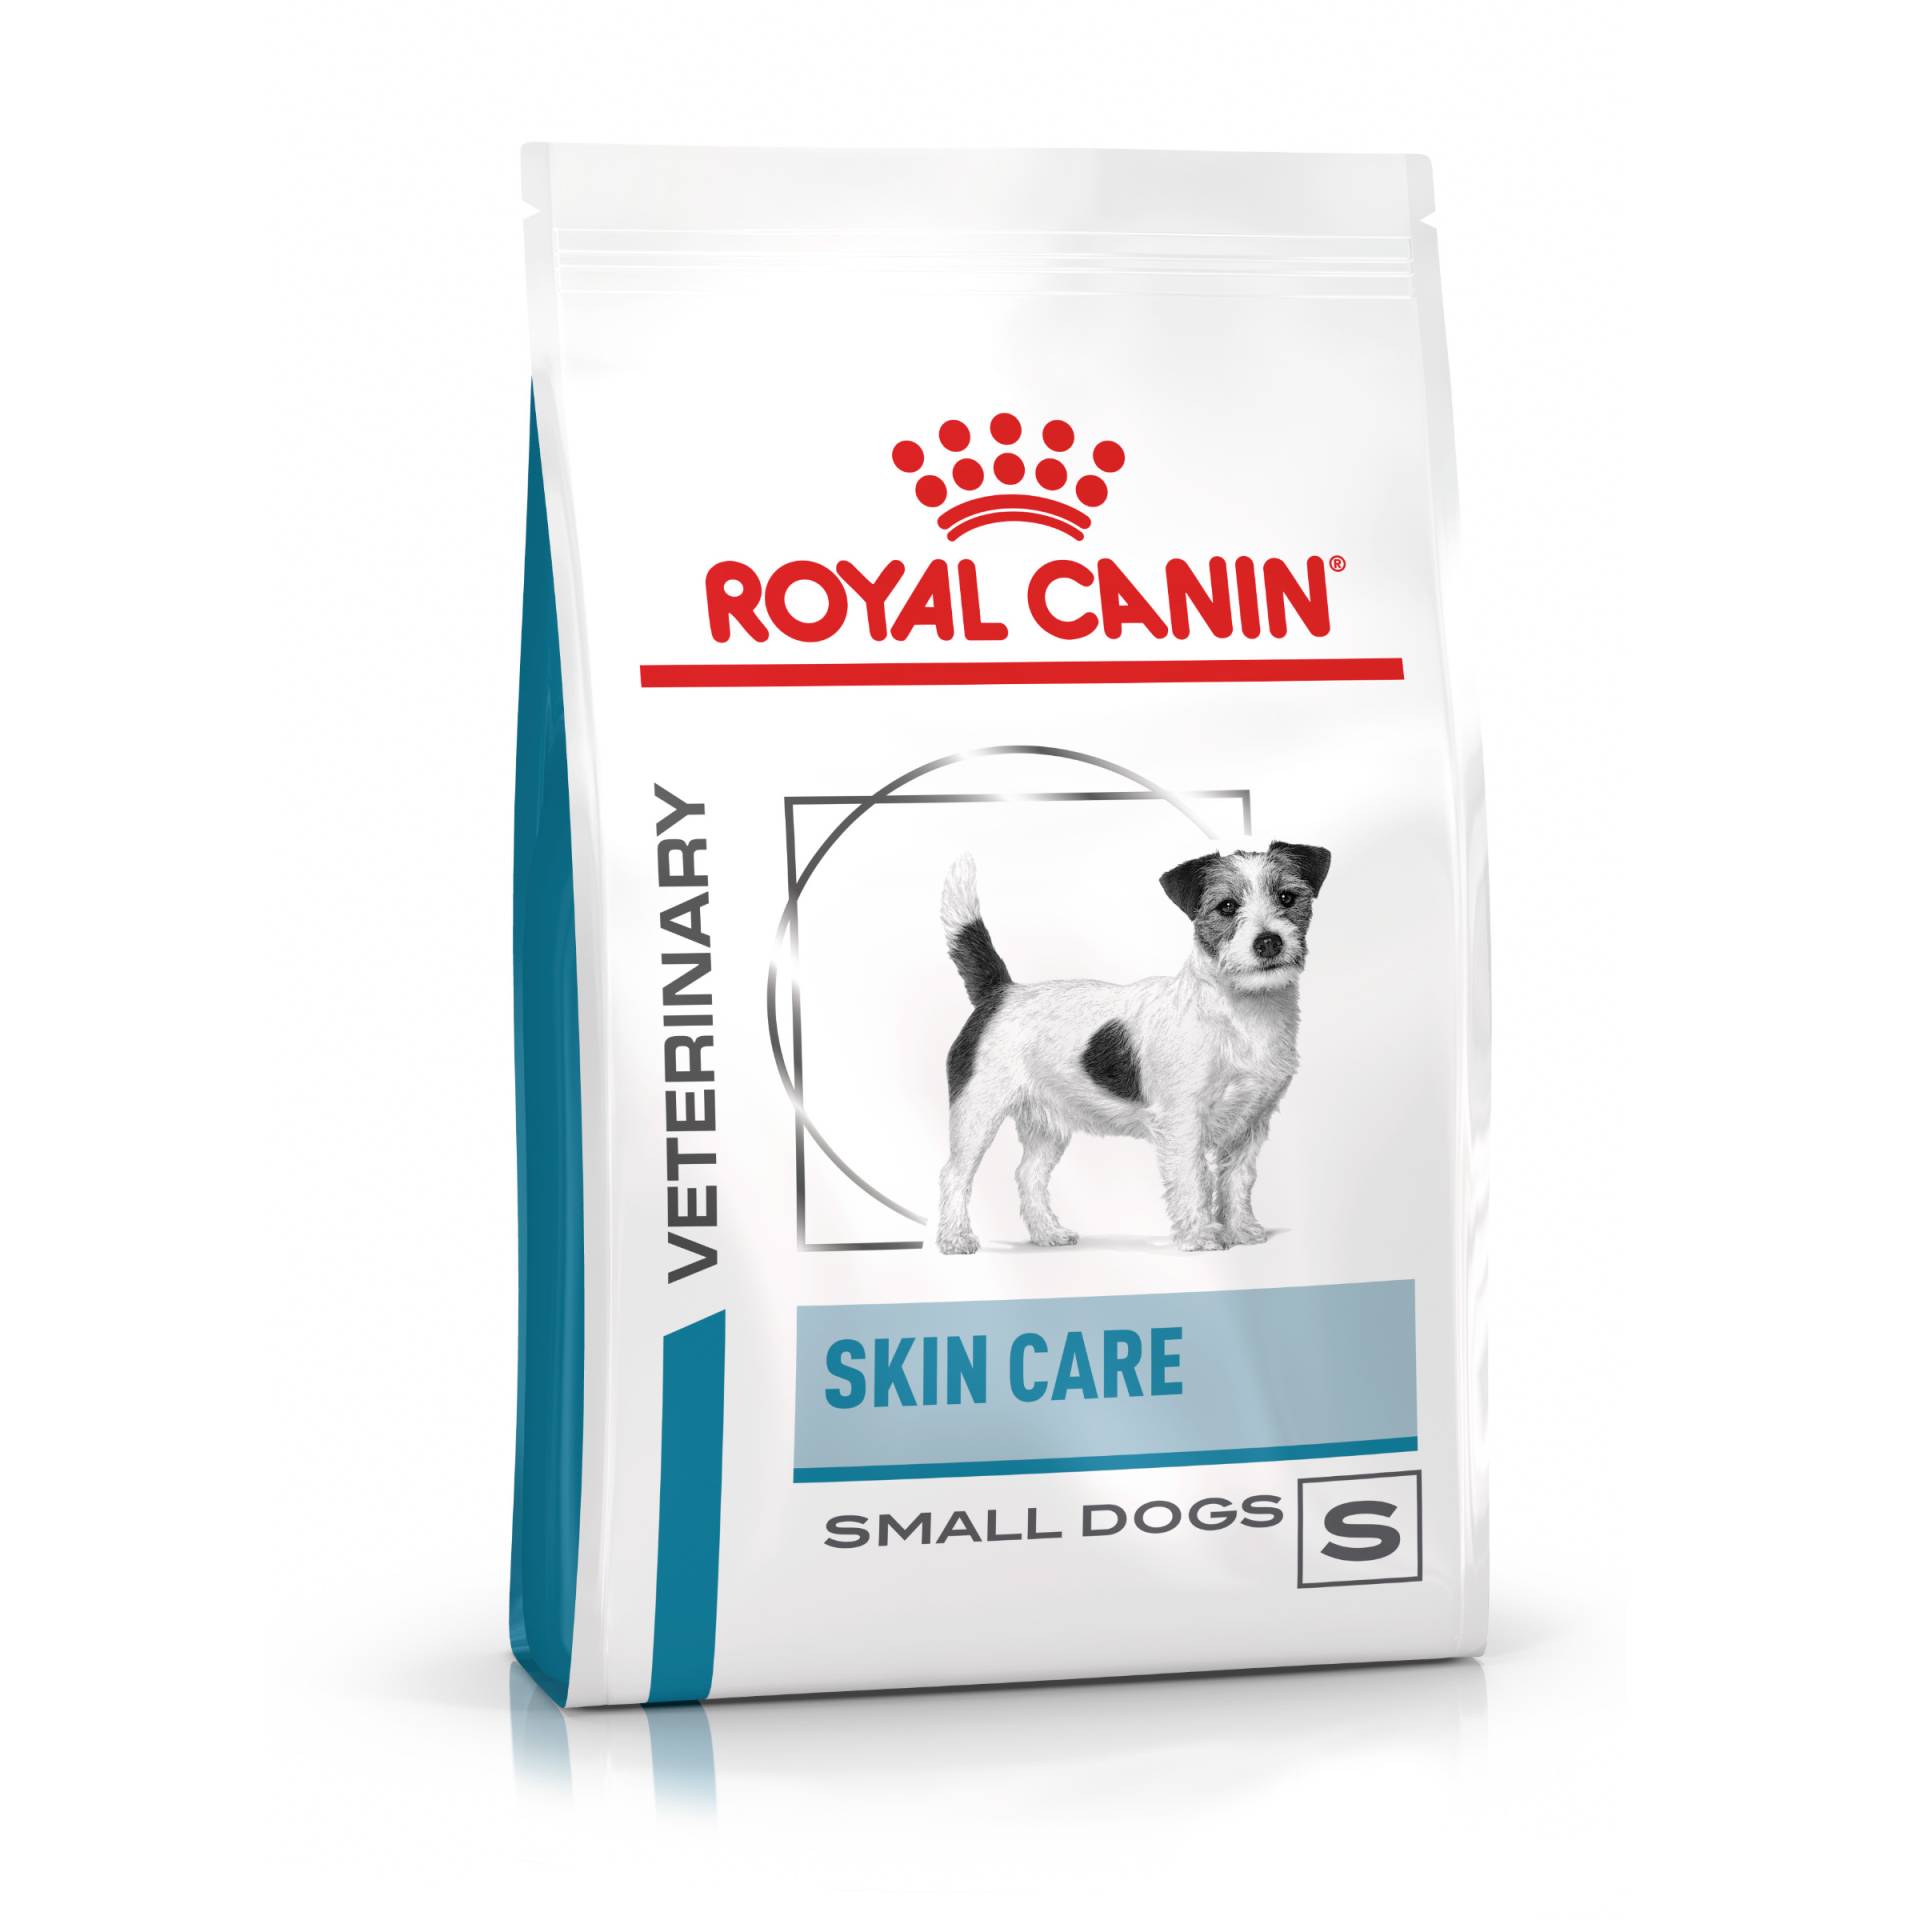 Royal Canin Veterinary Canine Skin Care Small Dog - Sparpaket: 2 x 4 kg von Royal Canin Veterinary Diet